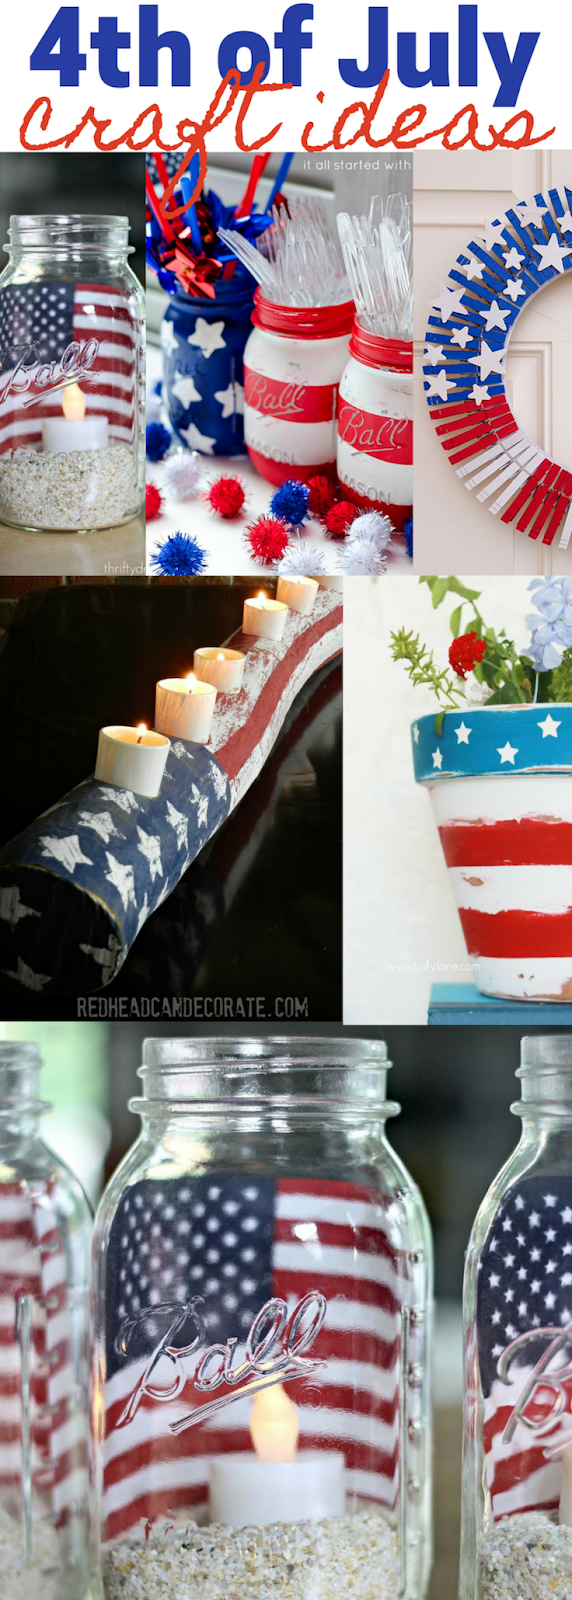 Farmhouse and Rustic 4th of July Crafts and Decorations